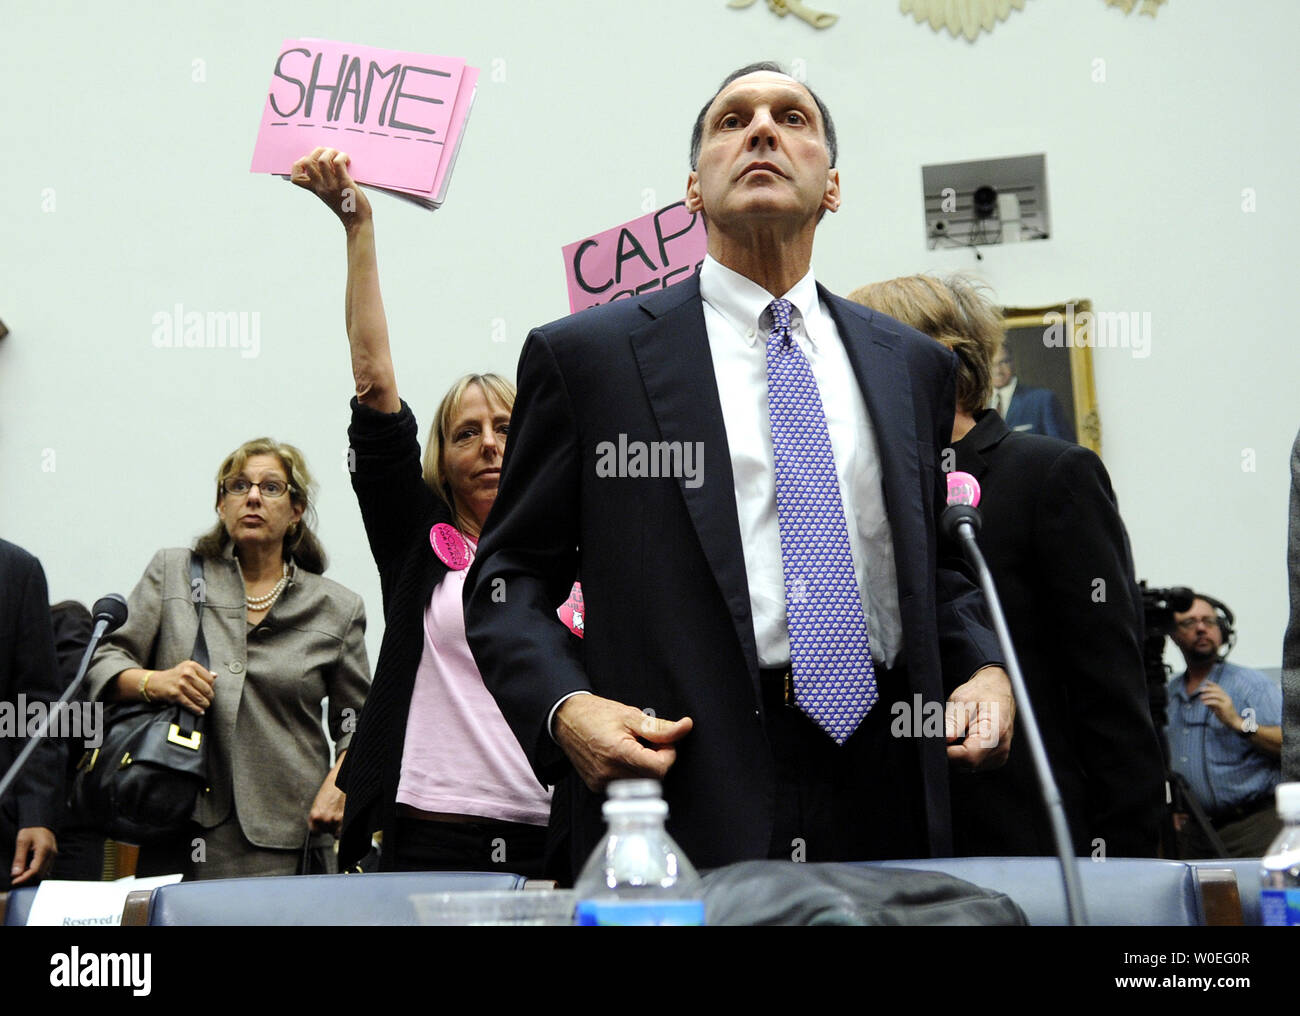 Richard Fuld Jr., Chairman and CEO of Lehman Brothers Holdings, takes his seat as protestors demonstrate behind him, prior to testifying before a House Oversight and Governmental Reform Committee hearing on pic